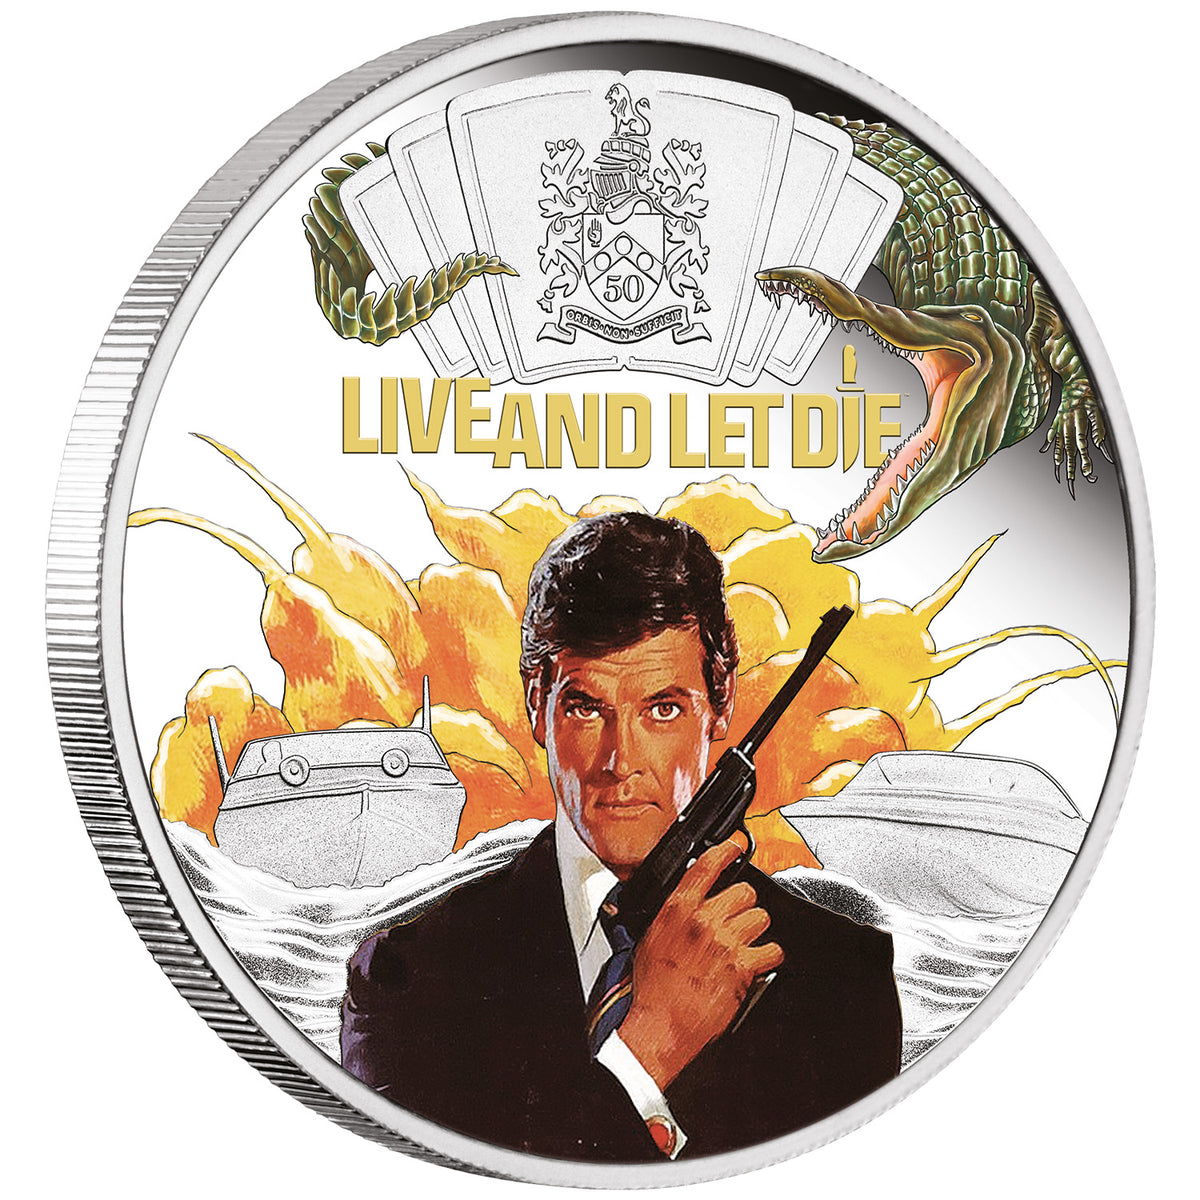 James Bond Live And Let Die 1oz Silver Proof Coin with Colour - Limited Edition - By The Perth Mint